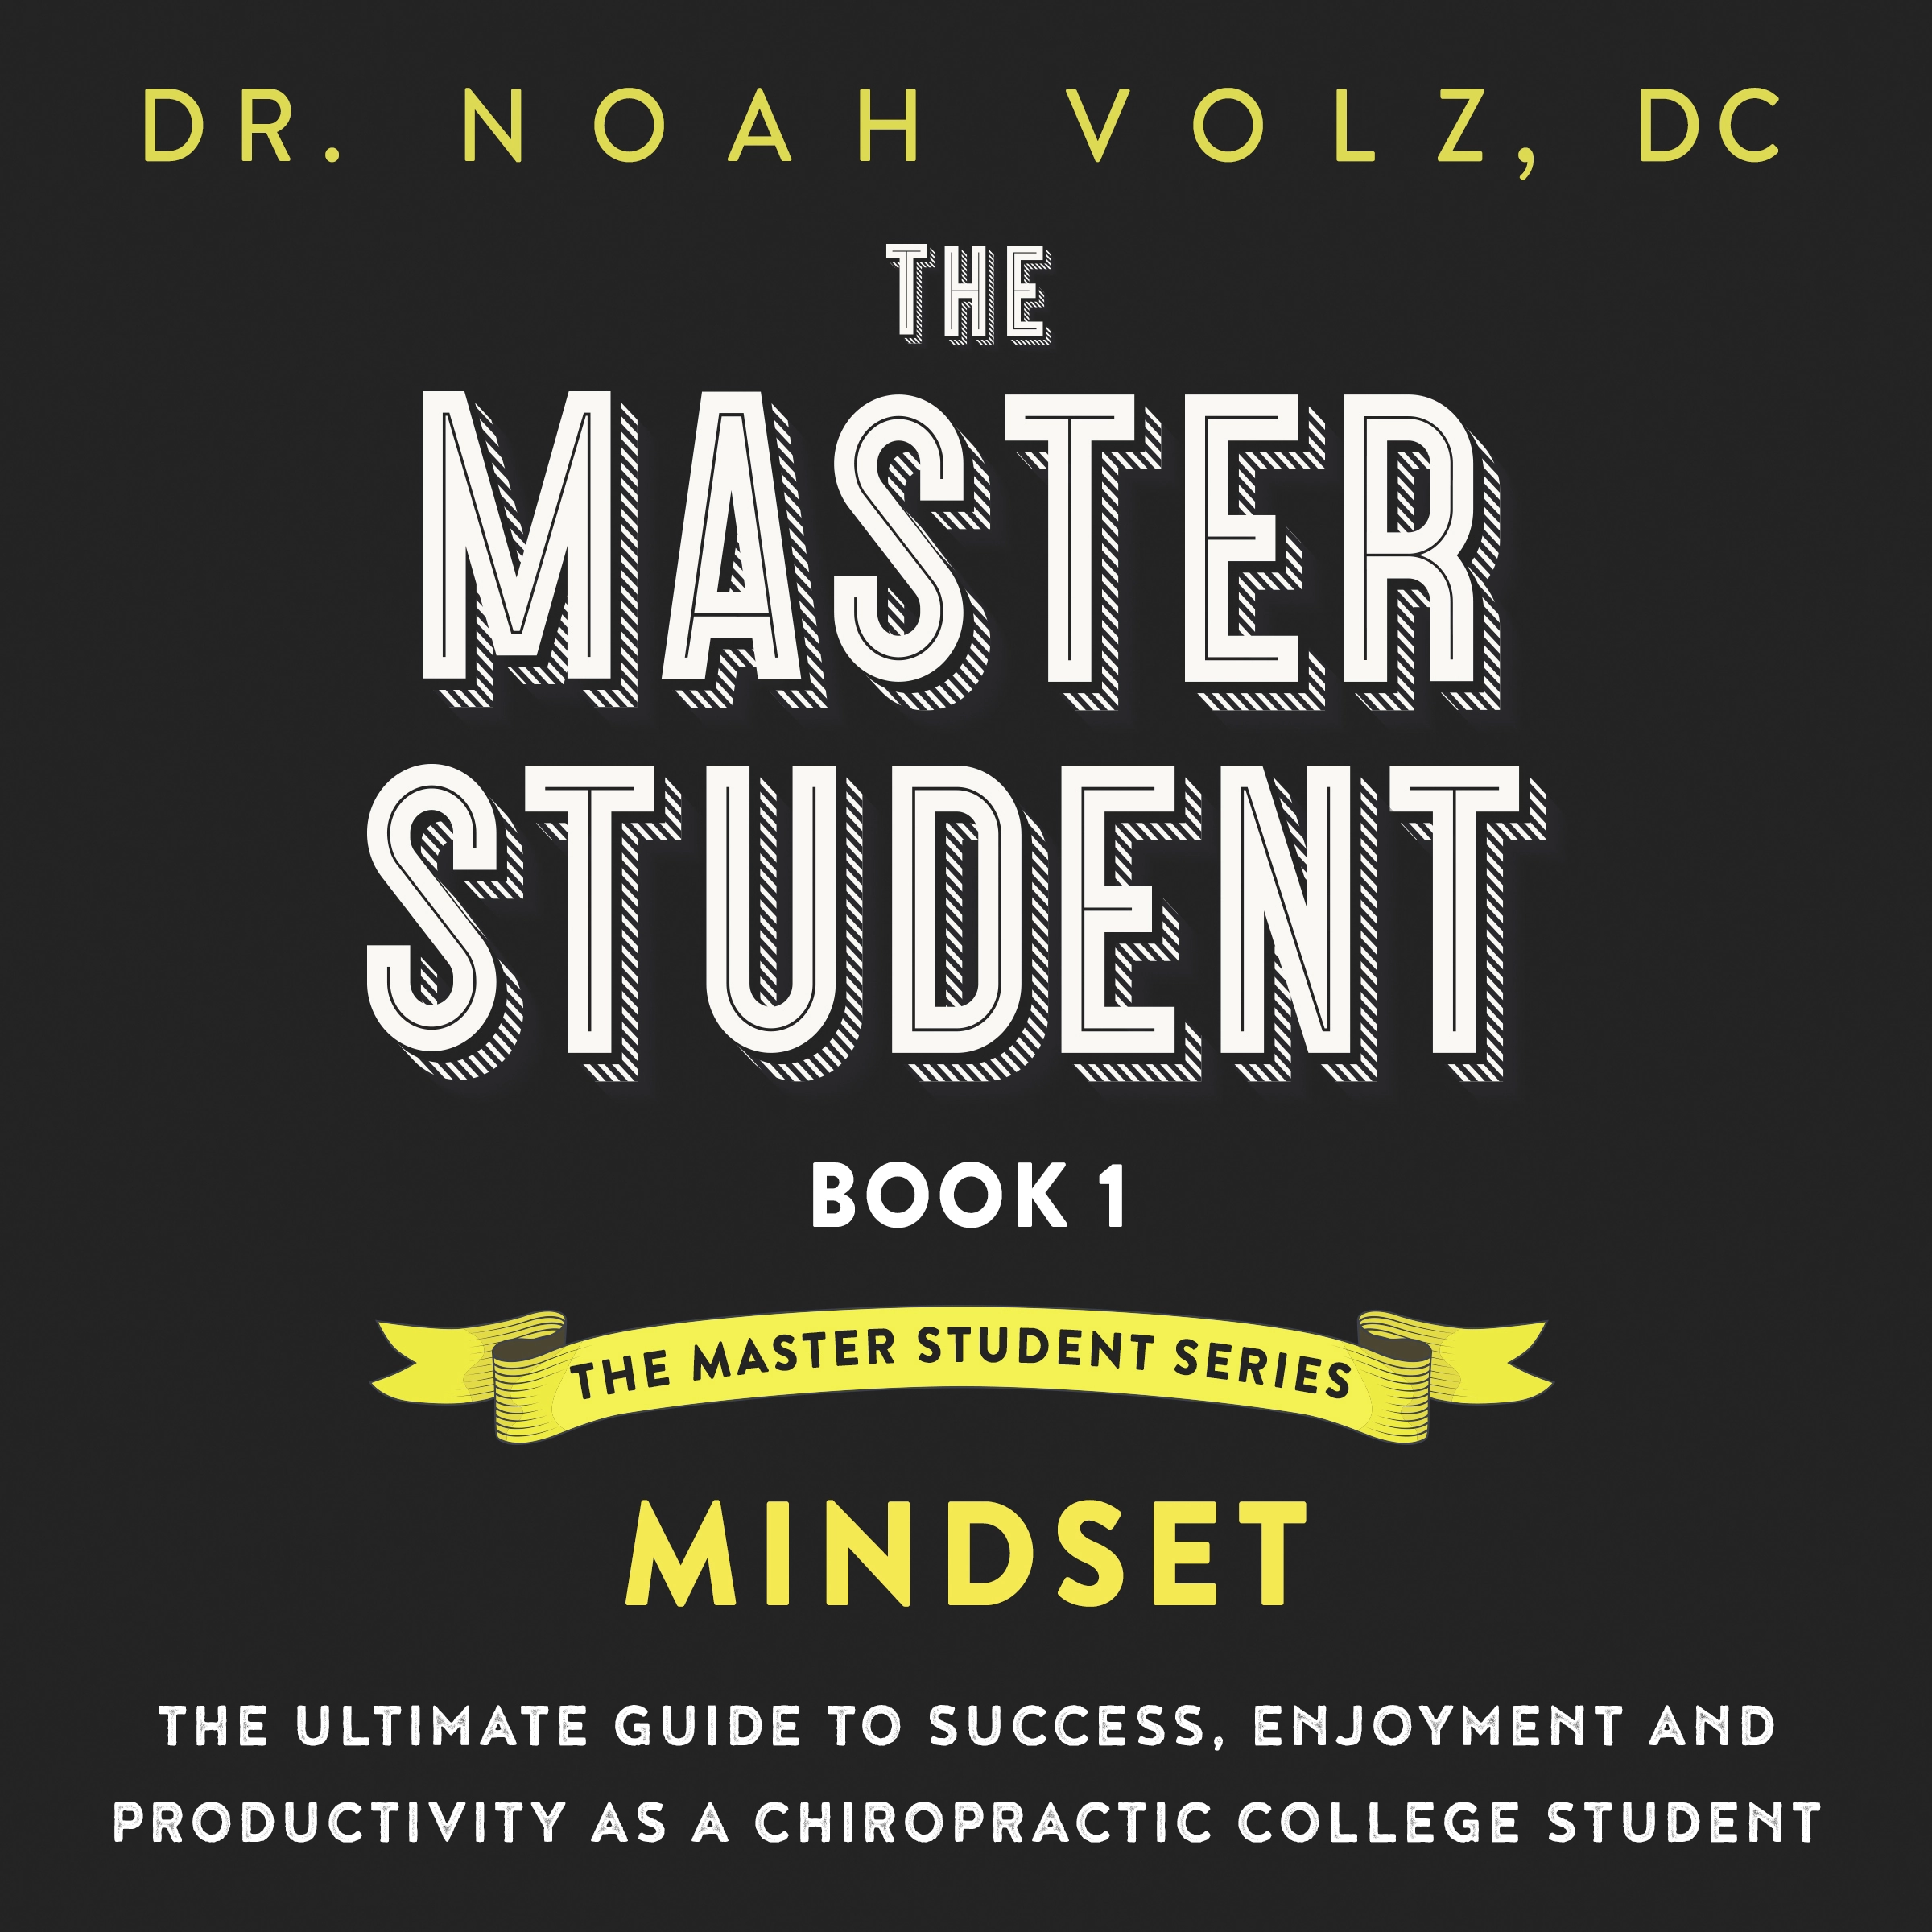 The Master Student: Book 1: Mindset Audiobook by Dr. Noah Volz